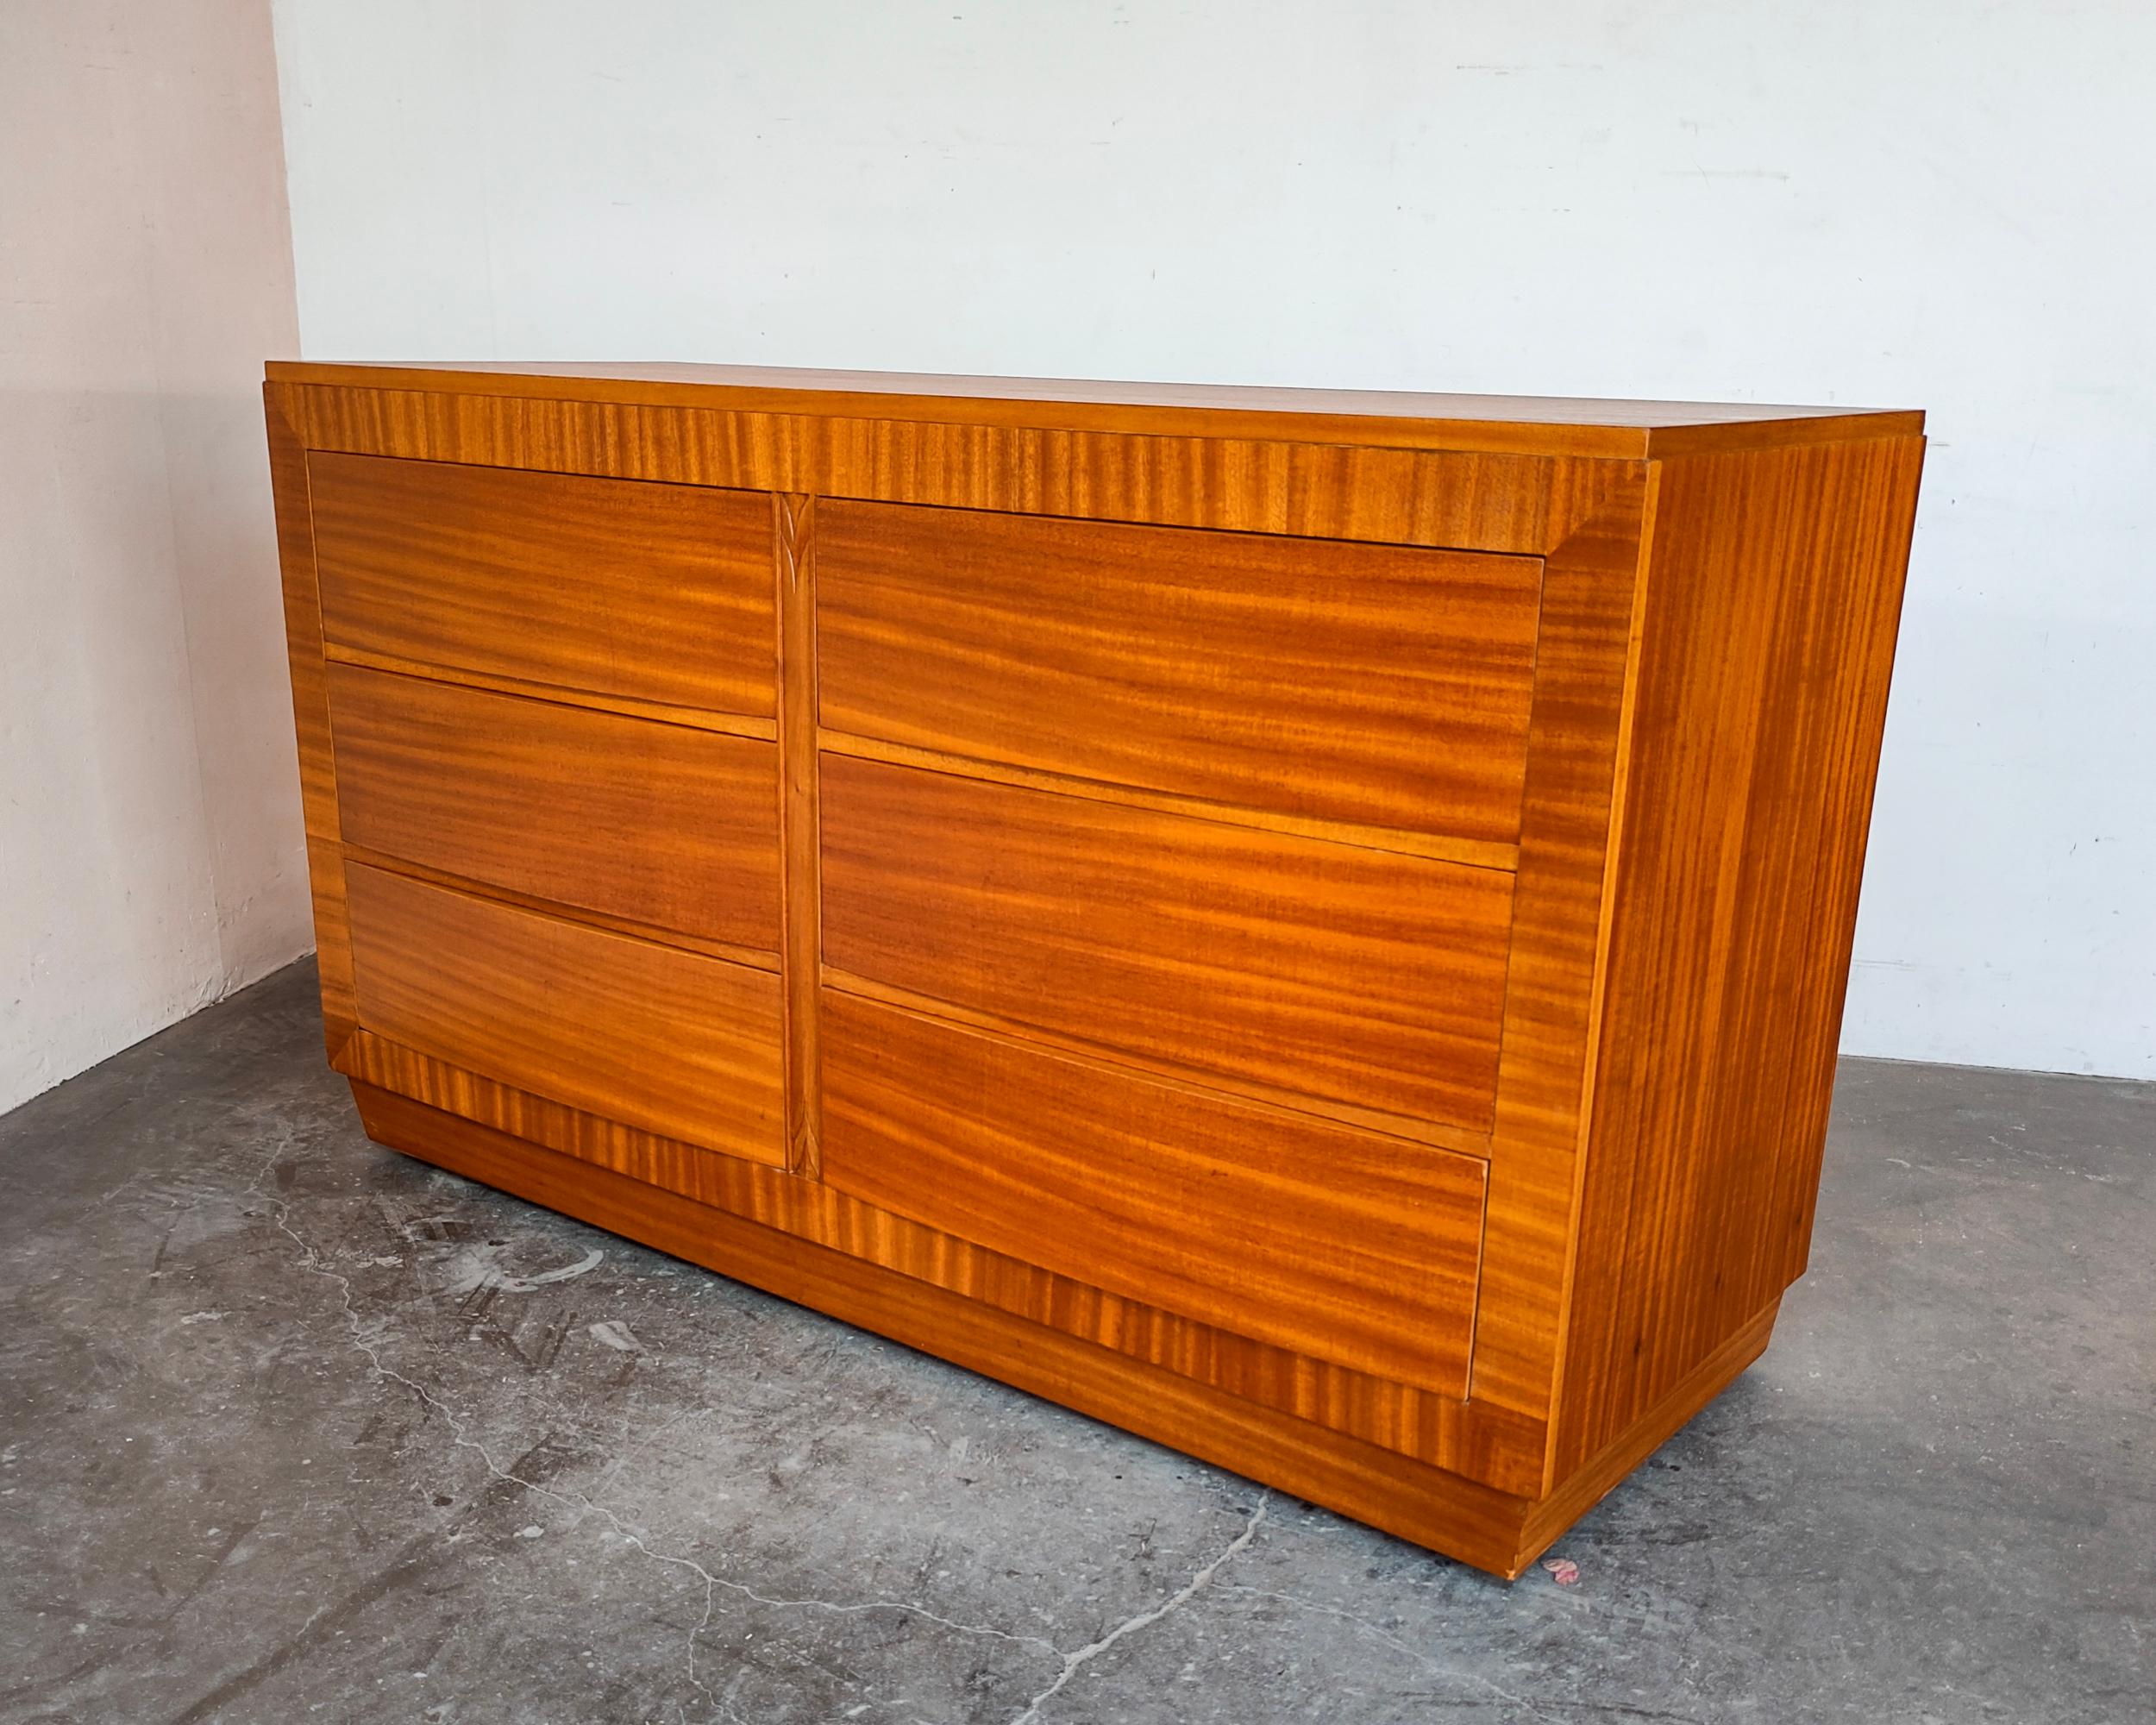 Gorgeous 1950-60s Rway dresser. Fully refinished to showcase beautiful mahogany wood grain. Six drawers with curved design, recessed finger pulls and dovetail joinery. Excellent craftsmanship, solid wood construction. Overall excellent condition,